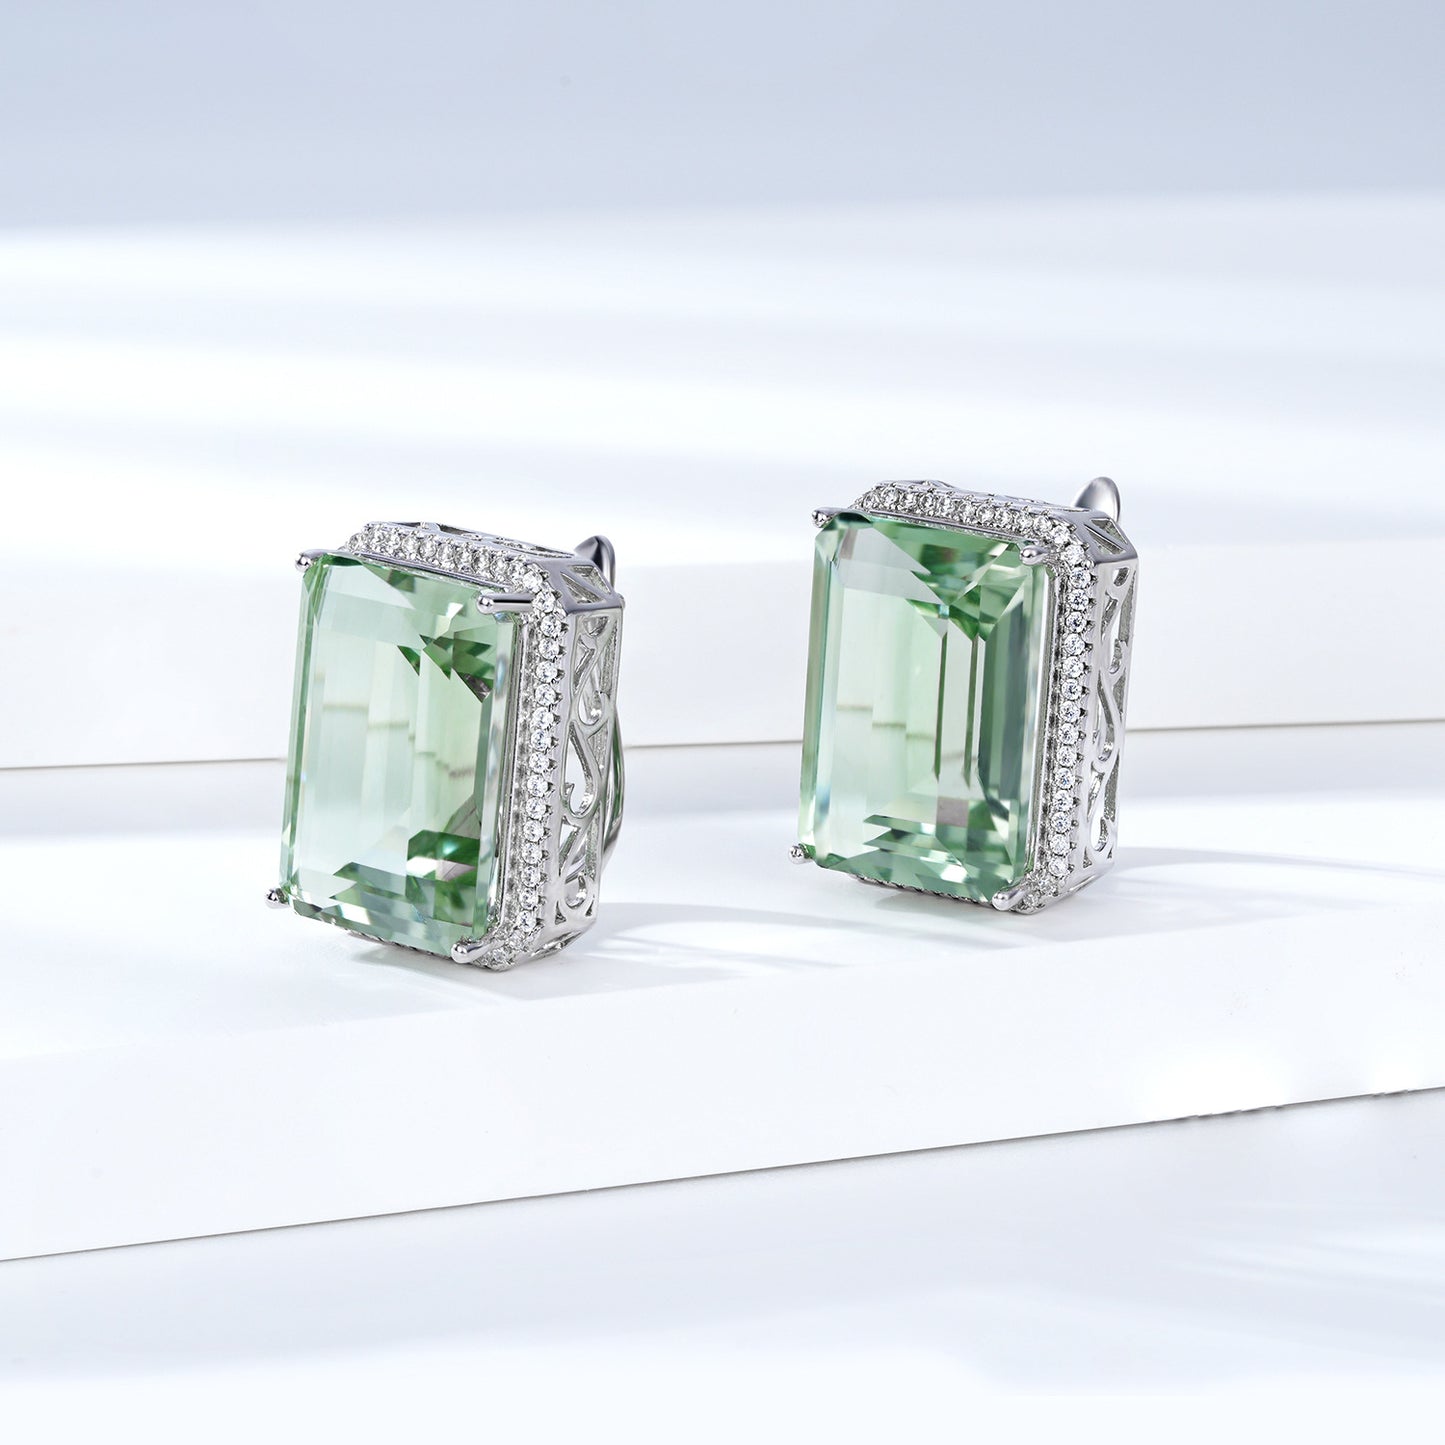 A pair of Natural Green Crystal earrings by Maramalive™, incorporating amethyst and diamond.